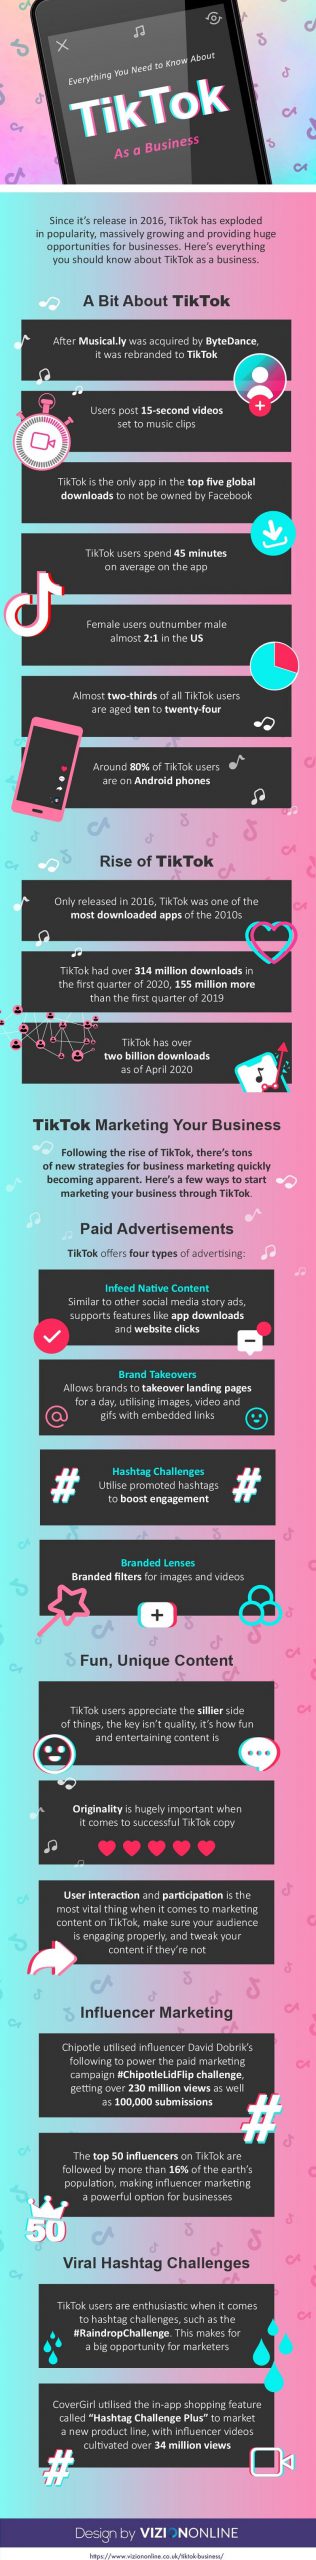 everything you need to know about tiktok infographic scaled 1